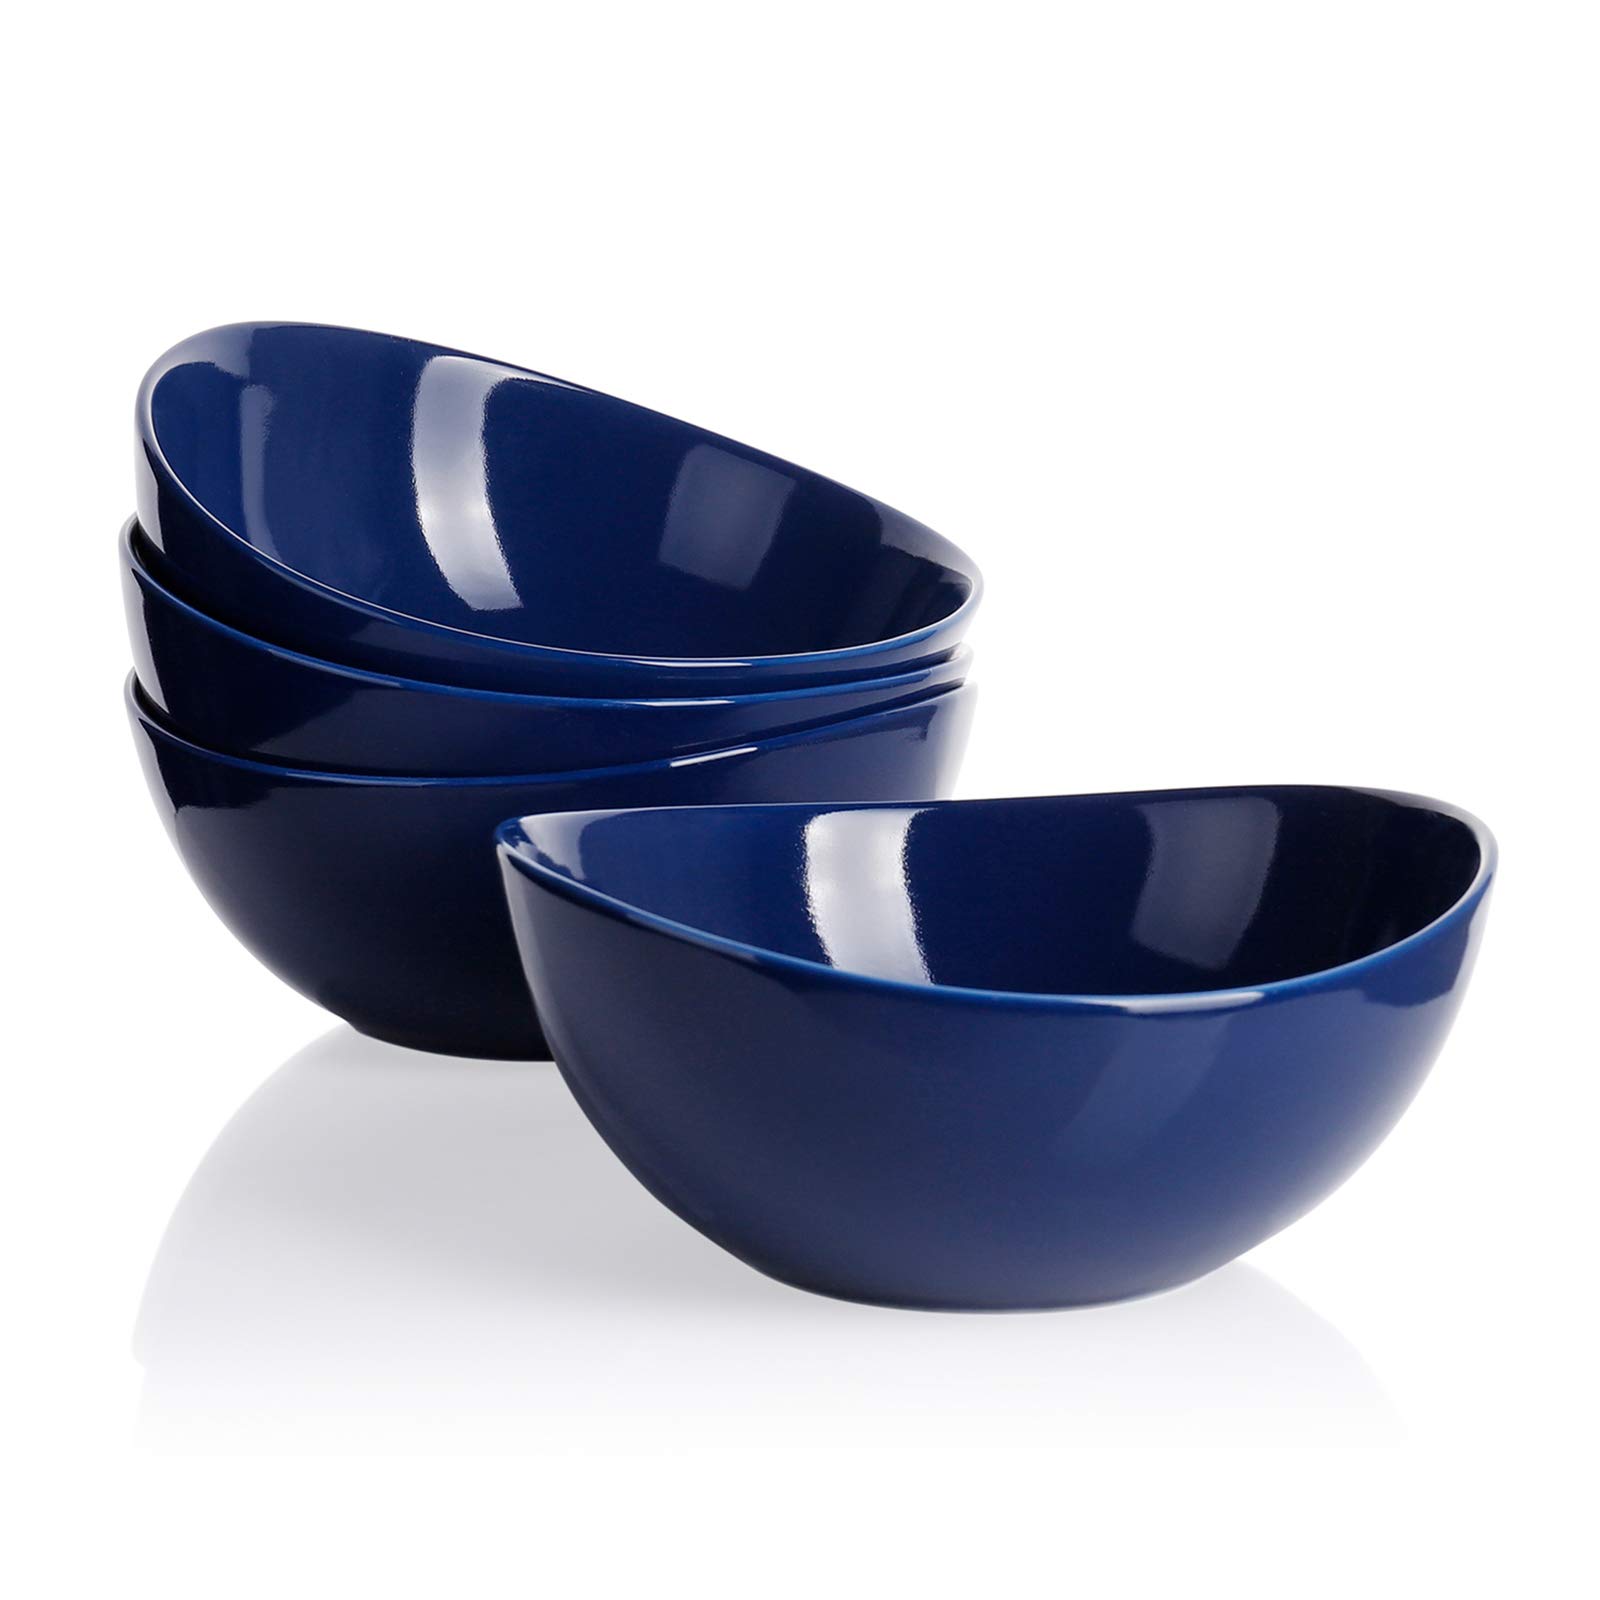 Sweese 103.403 Porcelain Bowls - 28 Ounce for Cereal, Salad and Desserts - Set of 4, Navy